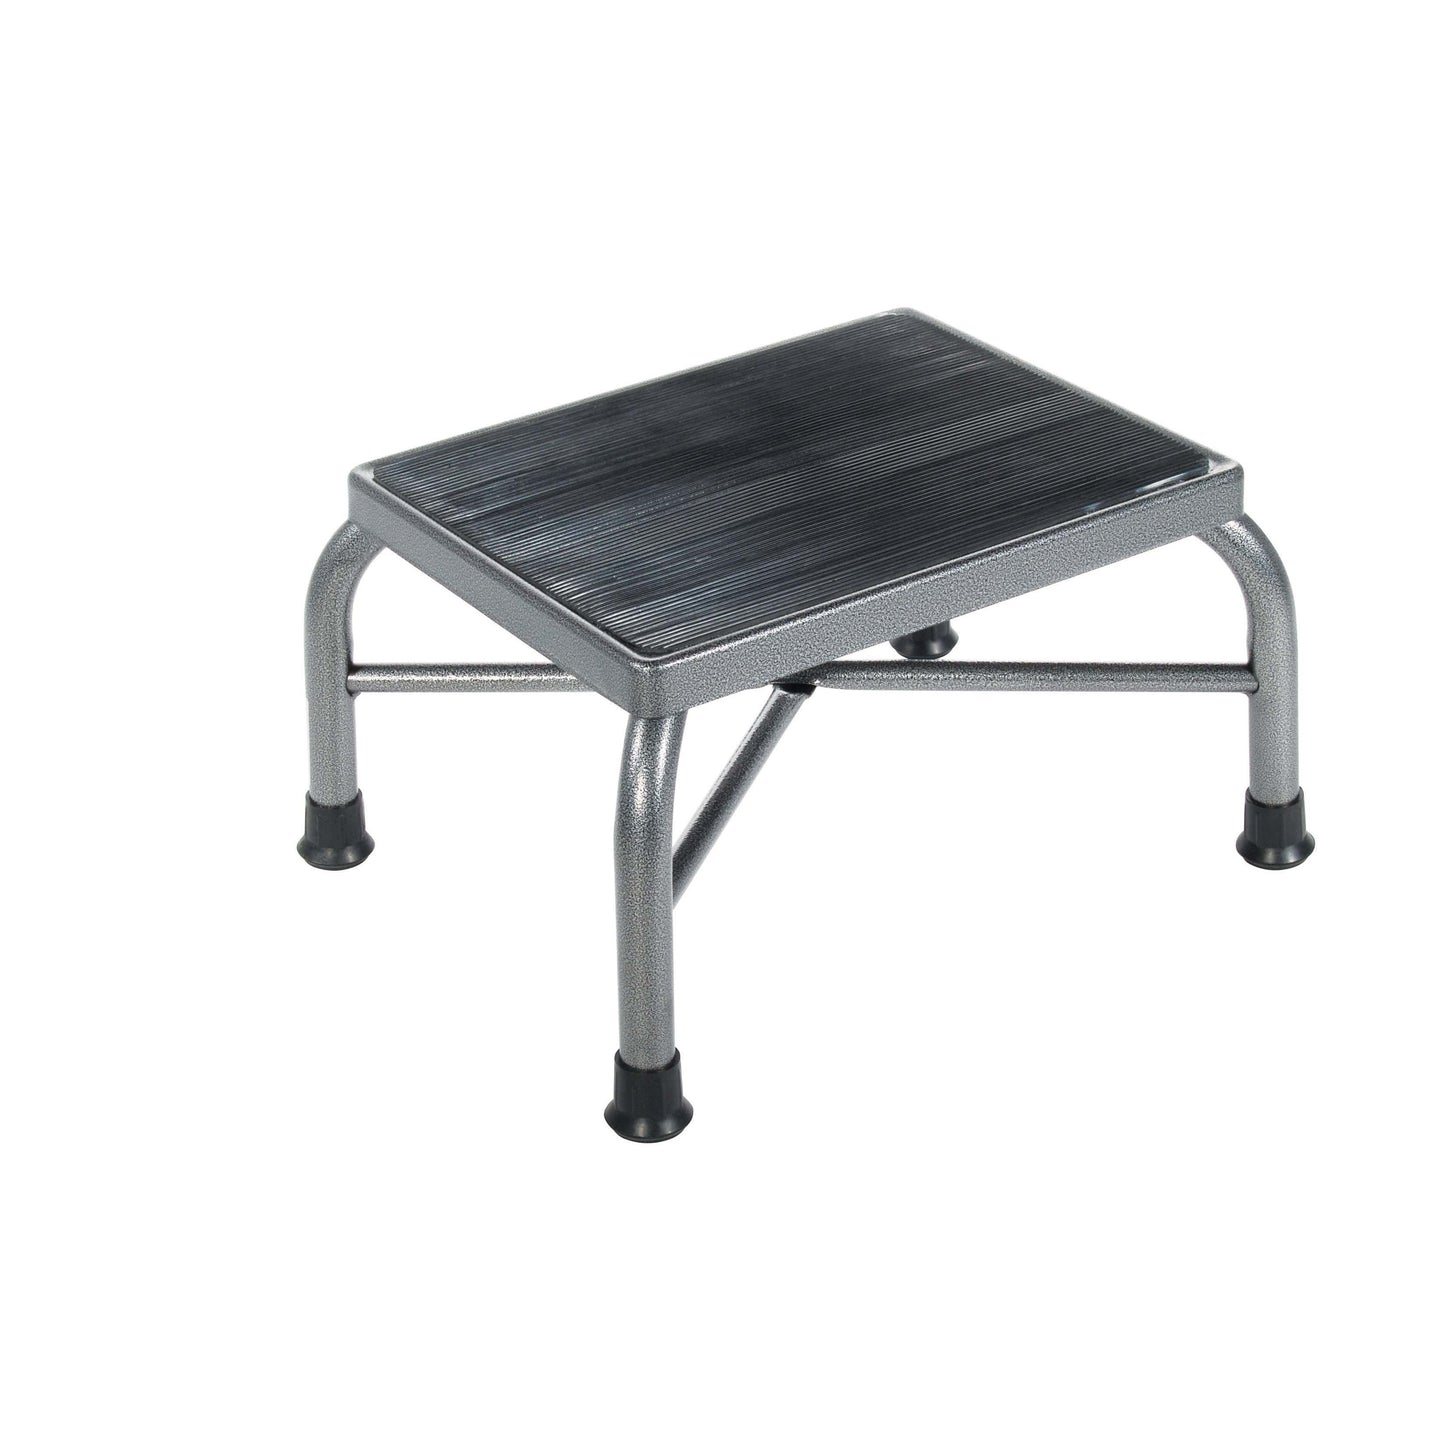 Drive 13037-1sv Heavy Duty Bariatric Footstool with Non Skid Rubber Platform